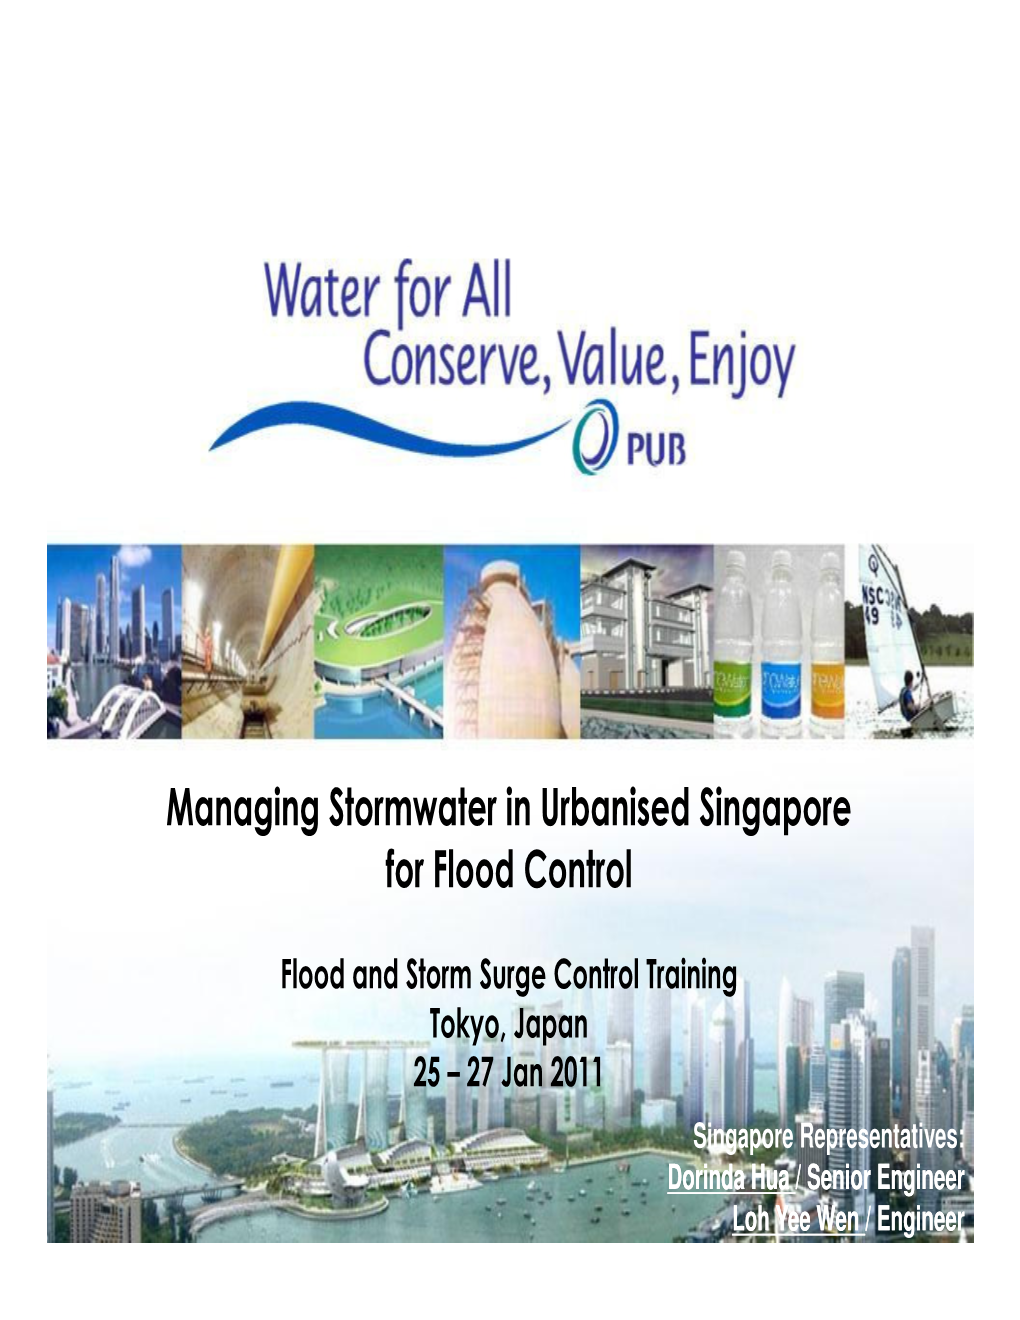 Managing Stormwater in Urbanised Singapore for Flood Control